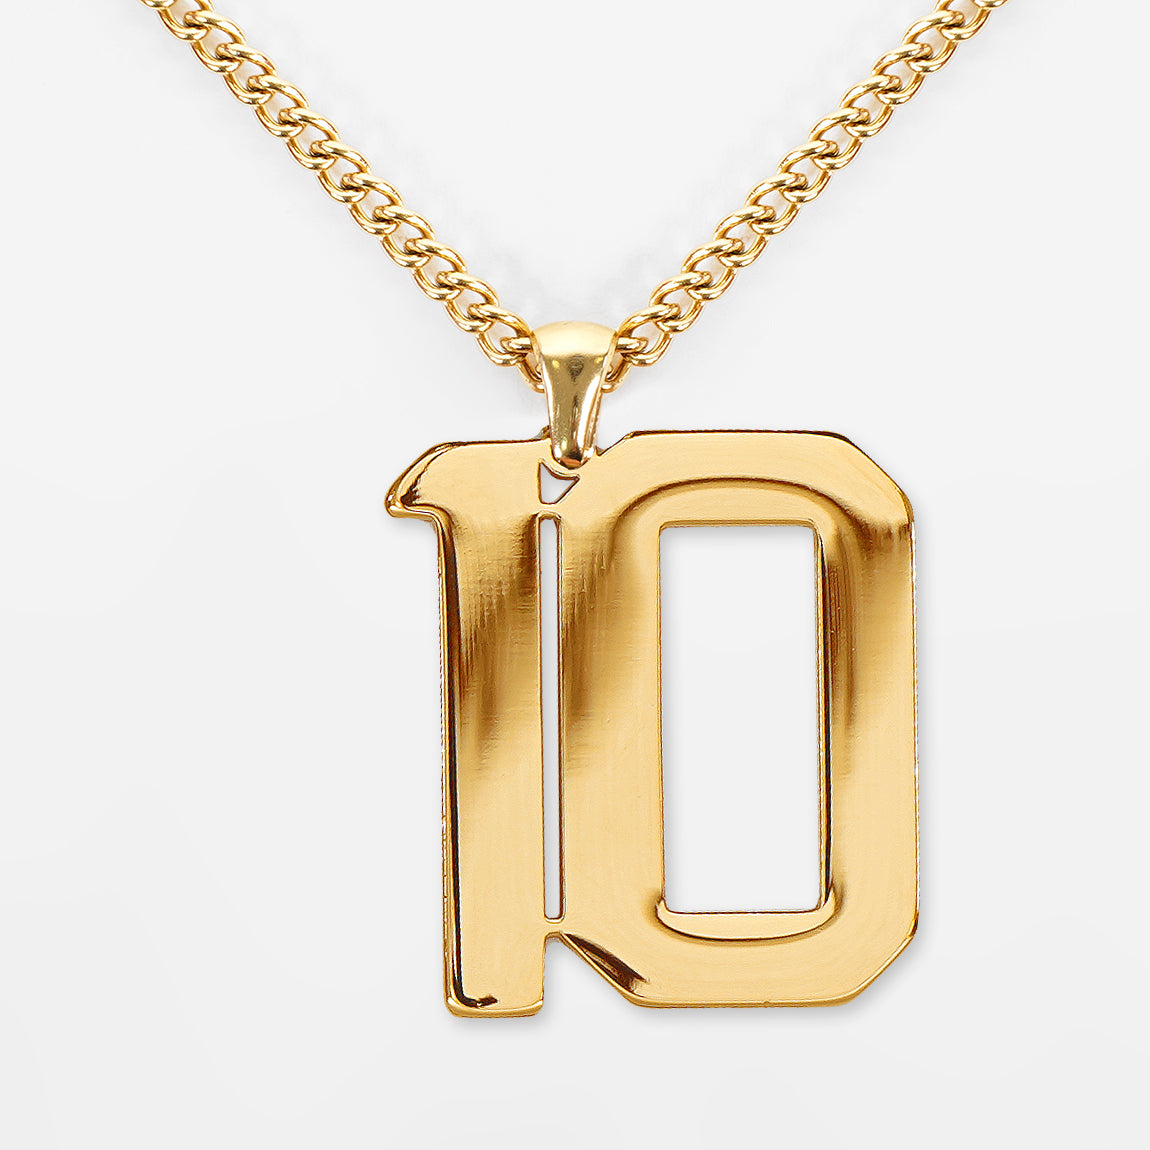 Collier acier et or, Force 10, Stainless steel and gold necklace, 'Force  10', Fine Jewels, 2021